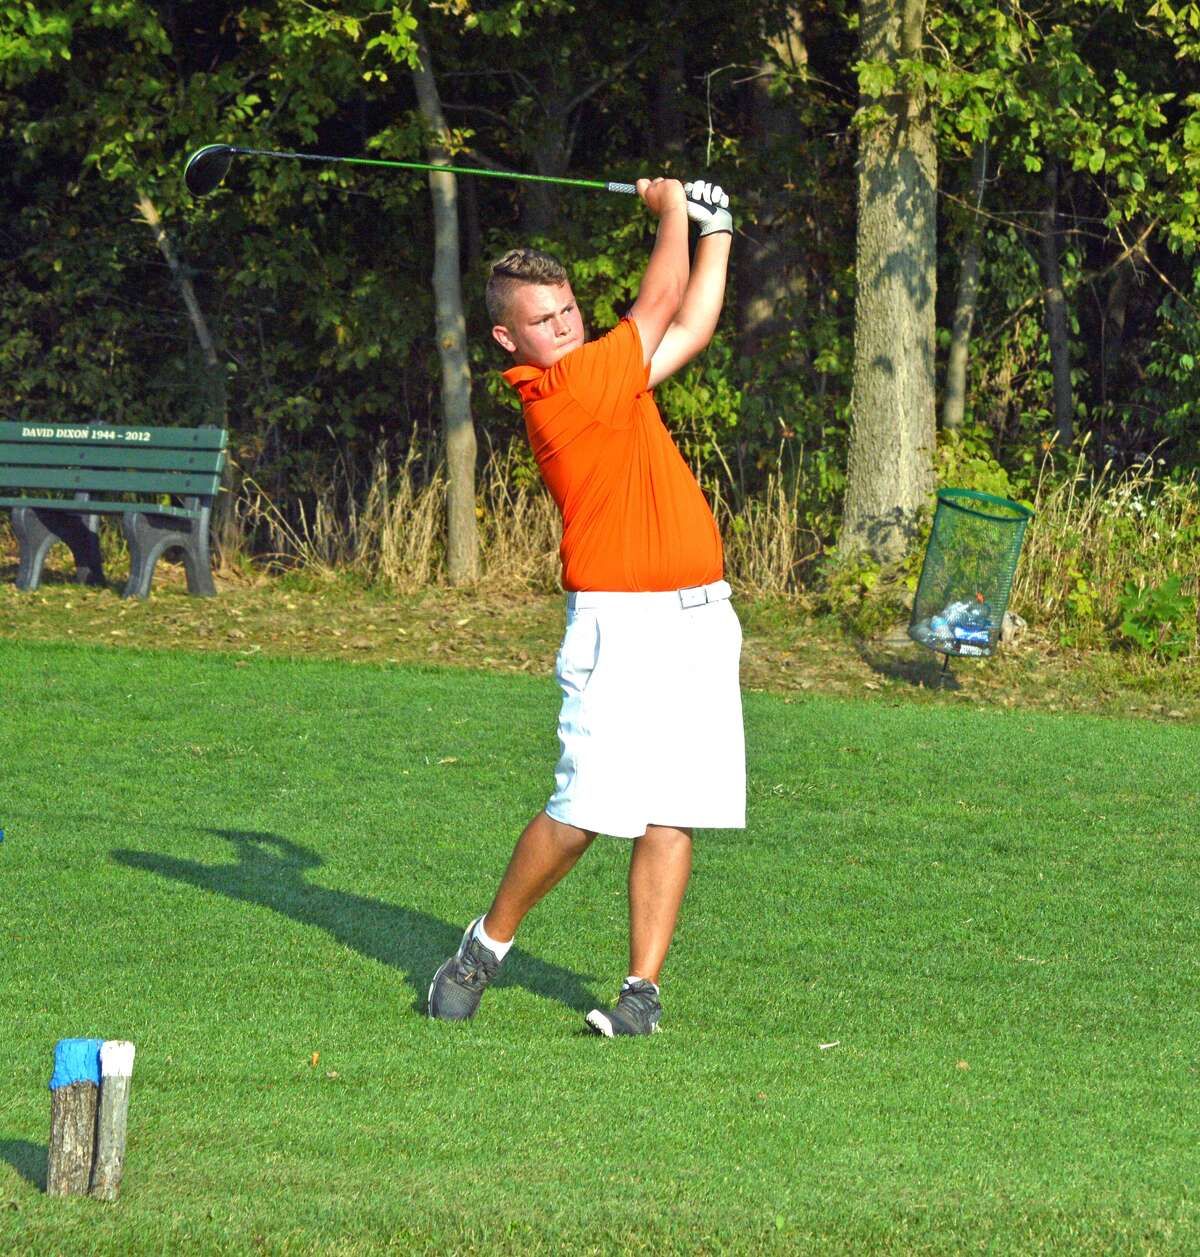 Edwardsville sophomore Ian Bailey, playing for EHS Black, hits a tee shot on hole No. 18 at Oak Brook Golf Club during the Dick Gerber Invitational on Friday.